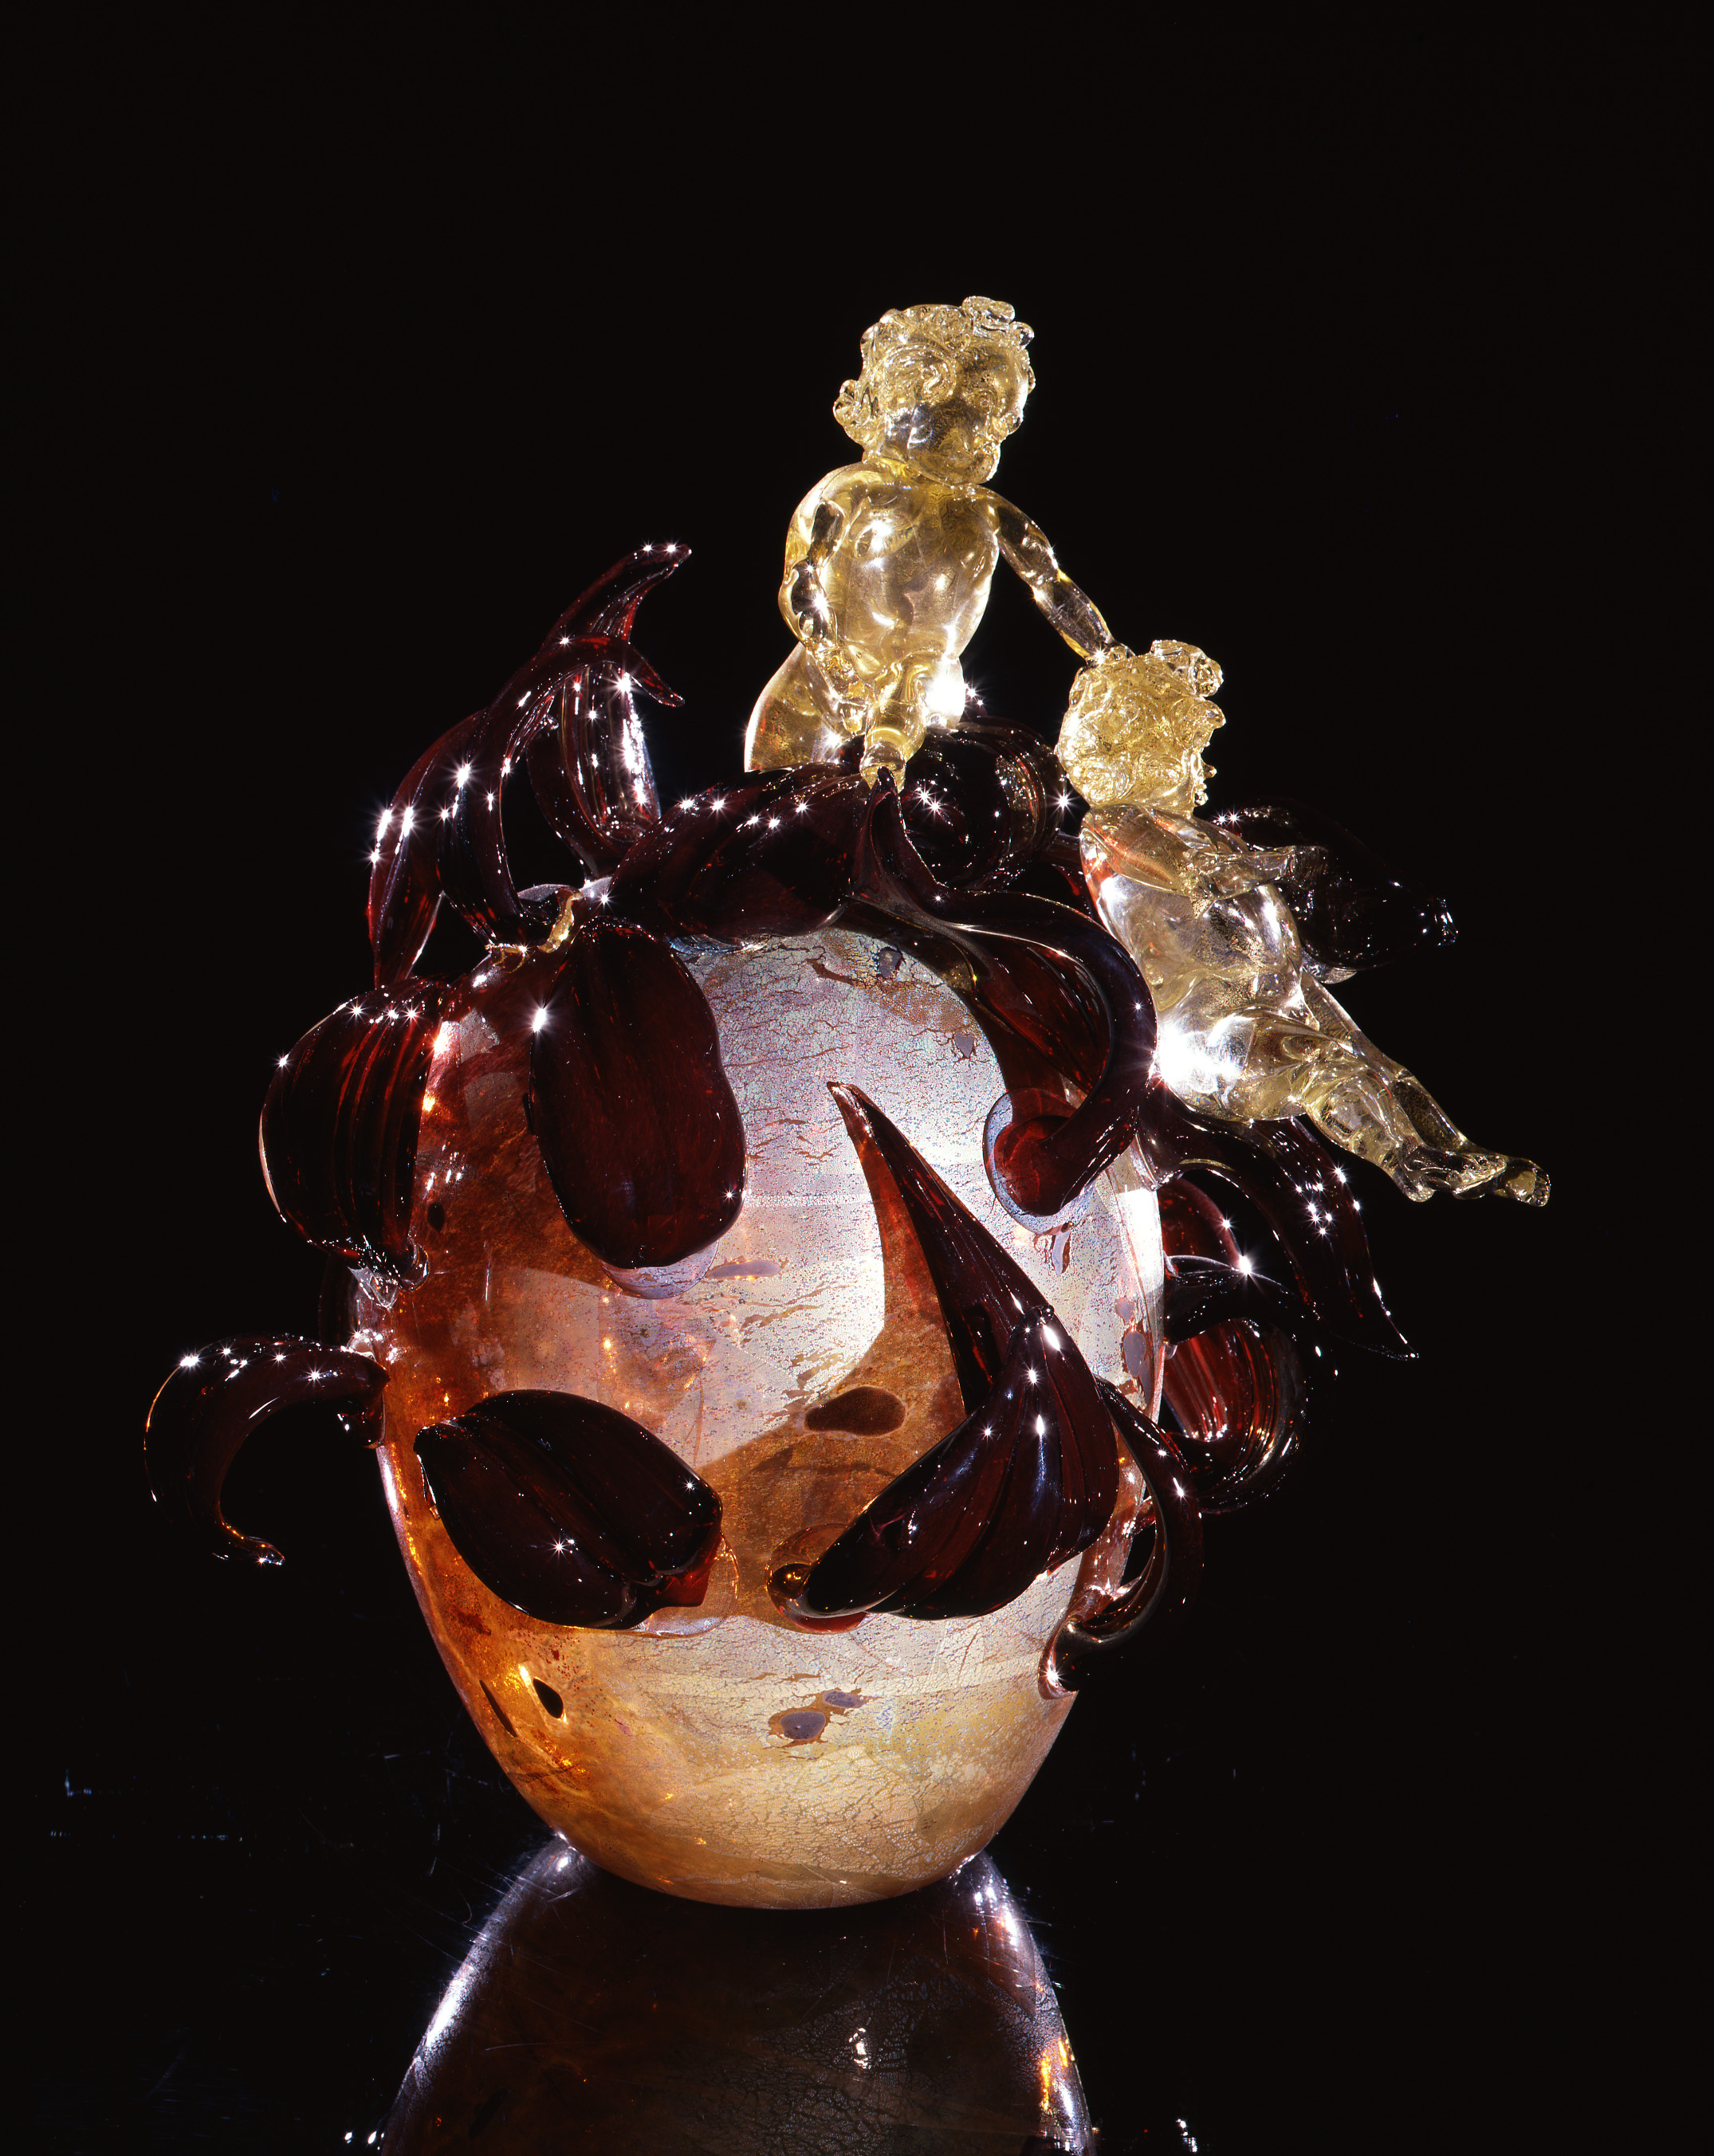  Dale Chihuly,&nbsp; Gold over Pale Ruby Putti Venetian with Burgundy Leaves&nbsp; (1994, glass, 19 x 16 x 13&nbsp;inches) 